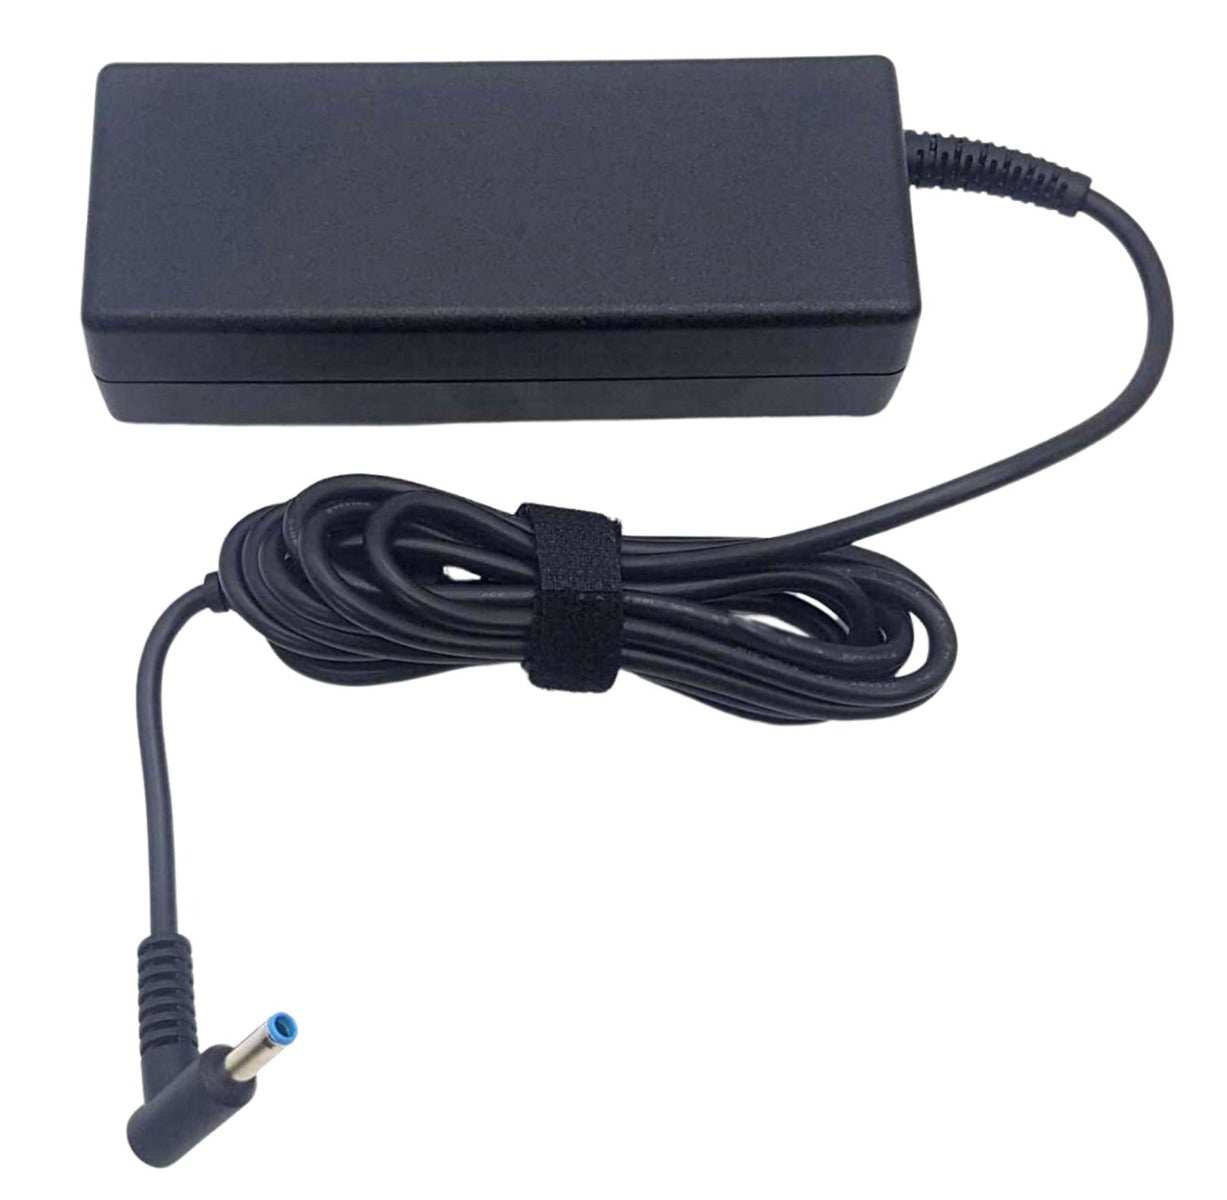 New Genuine Delta 90W 19V 4.74A Laptop Adapter 4.5mm x 3.0mm Blue Tip Power Charger